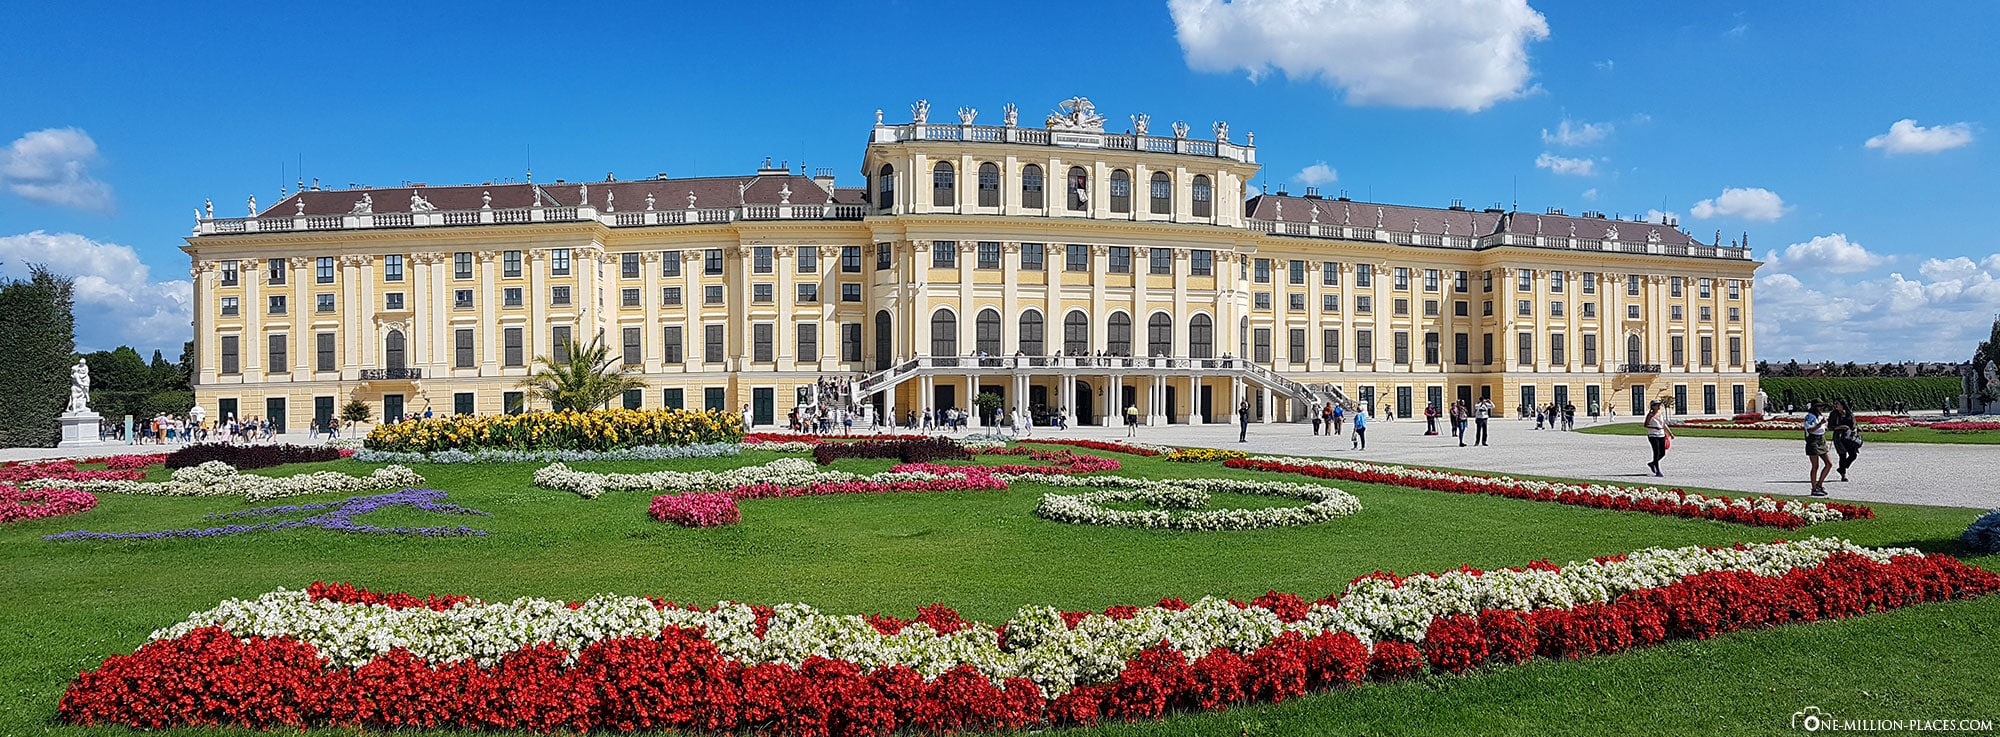 Panorama, Schönbrunn Palace, Vienna, Sights, Things to do, Attractions, Sightseeing, Travel Tips